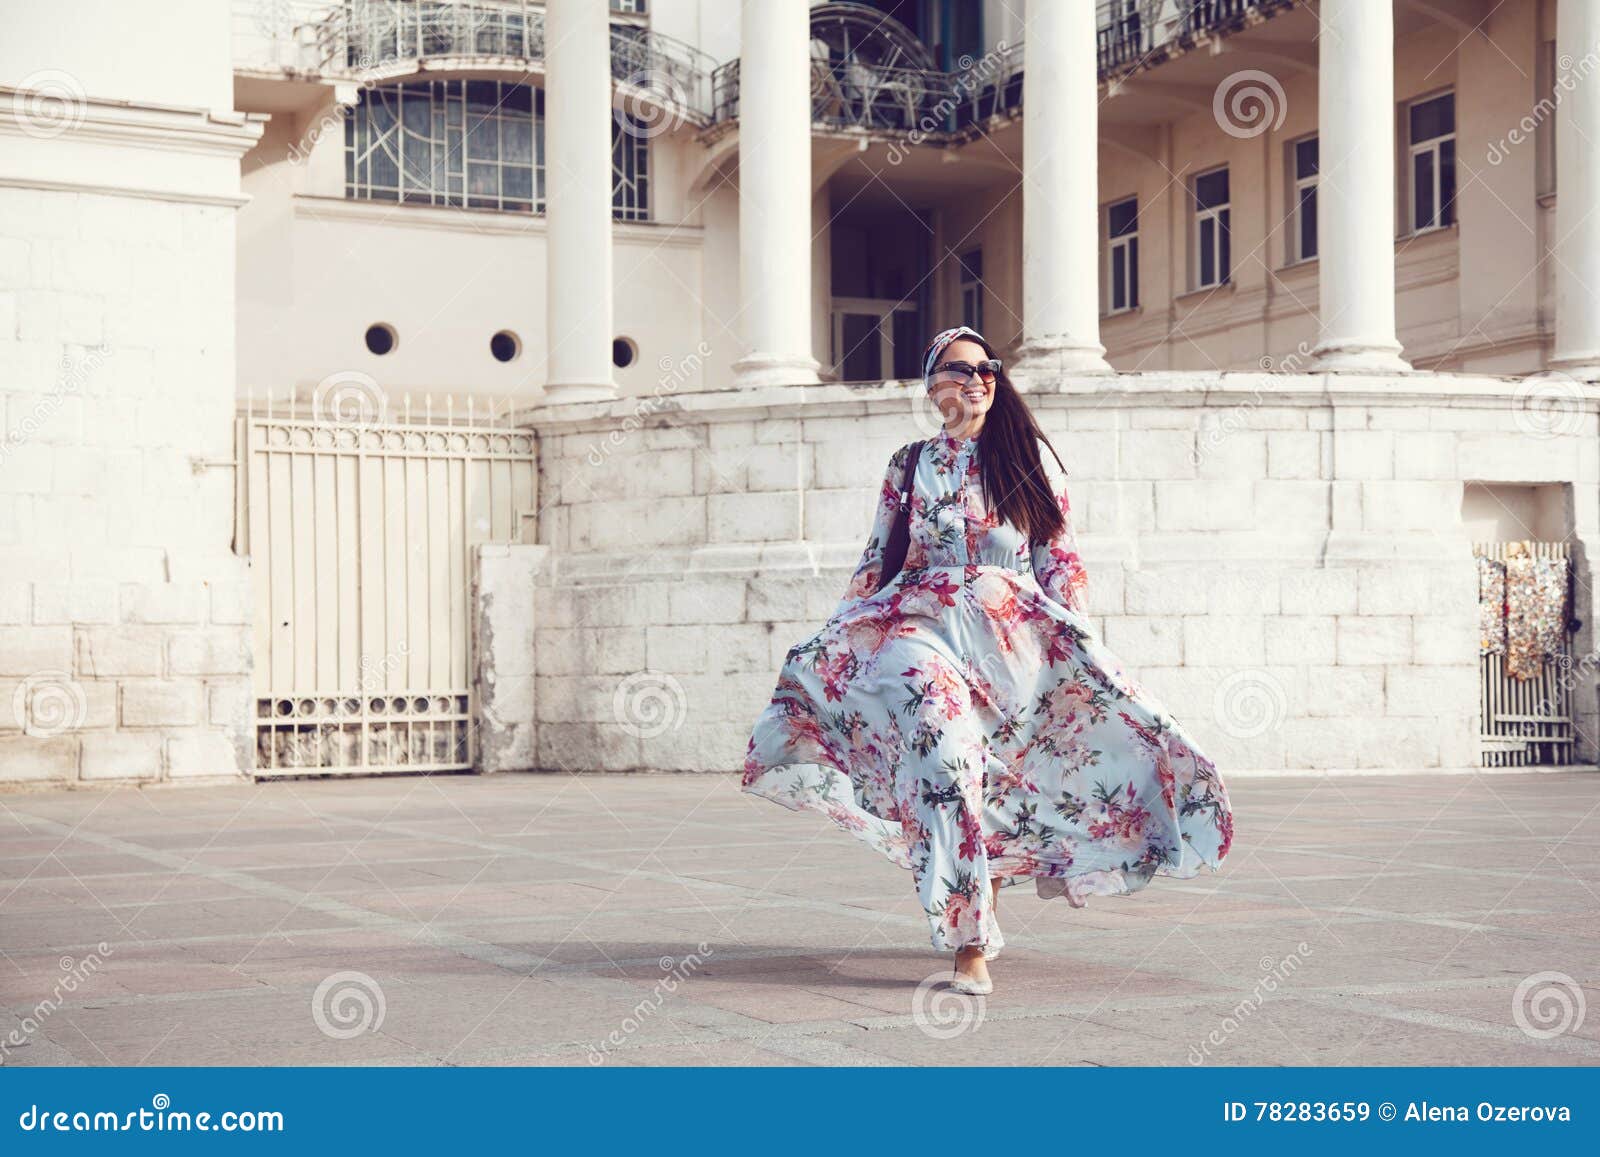 plus size model in floral dress